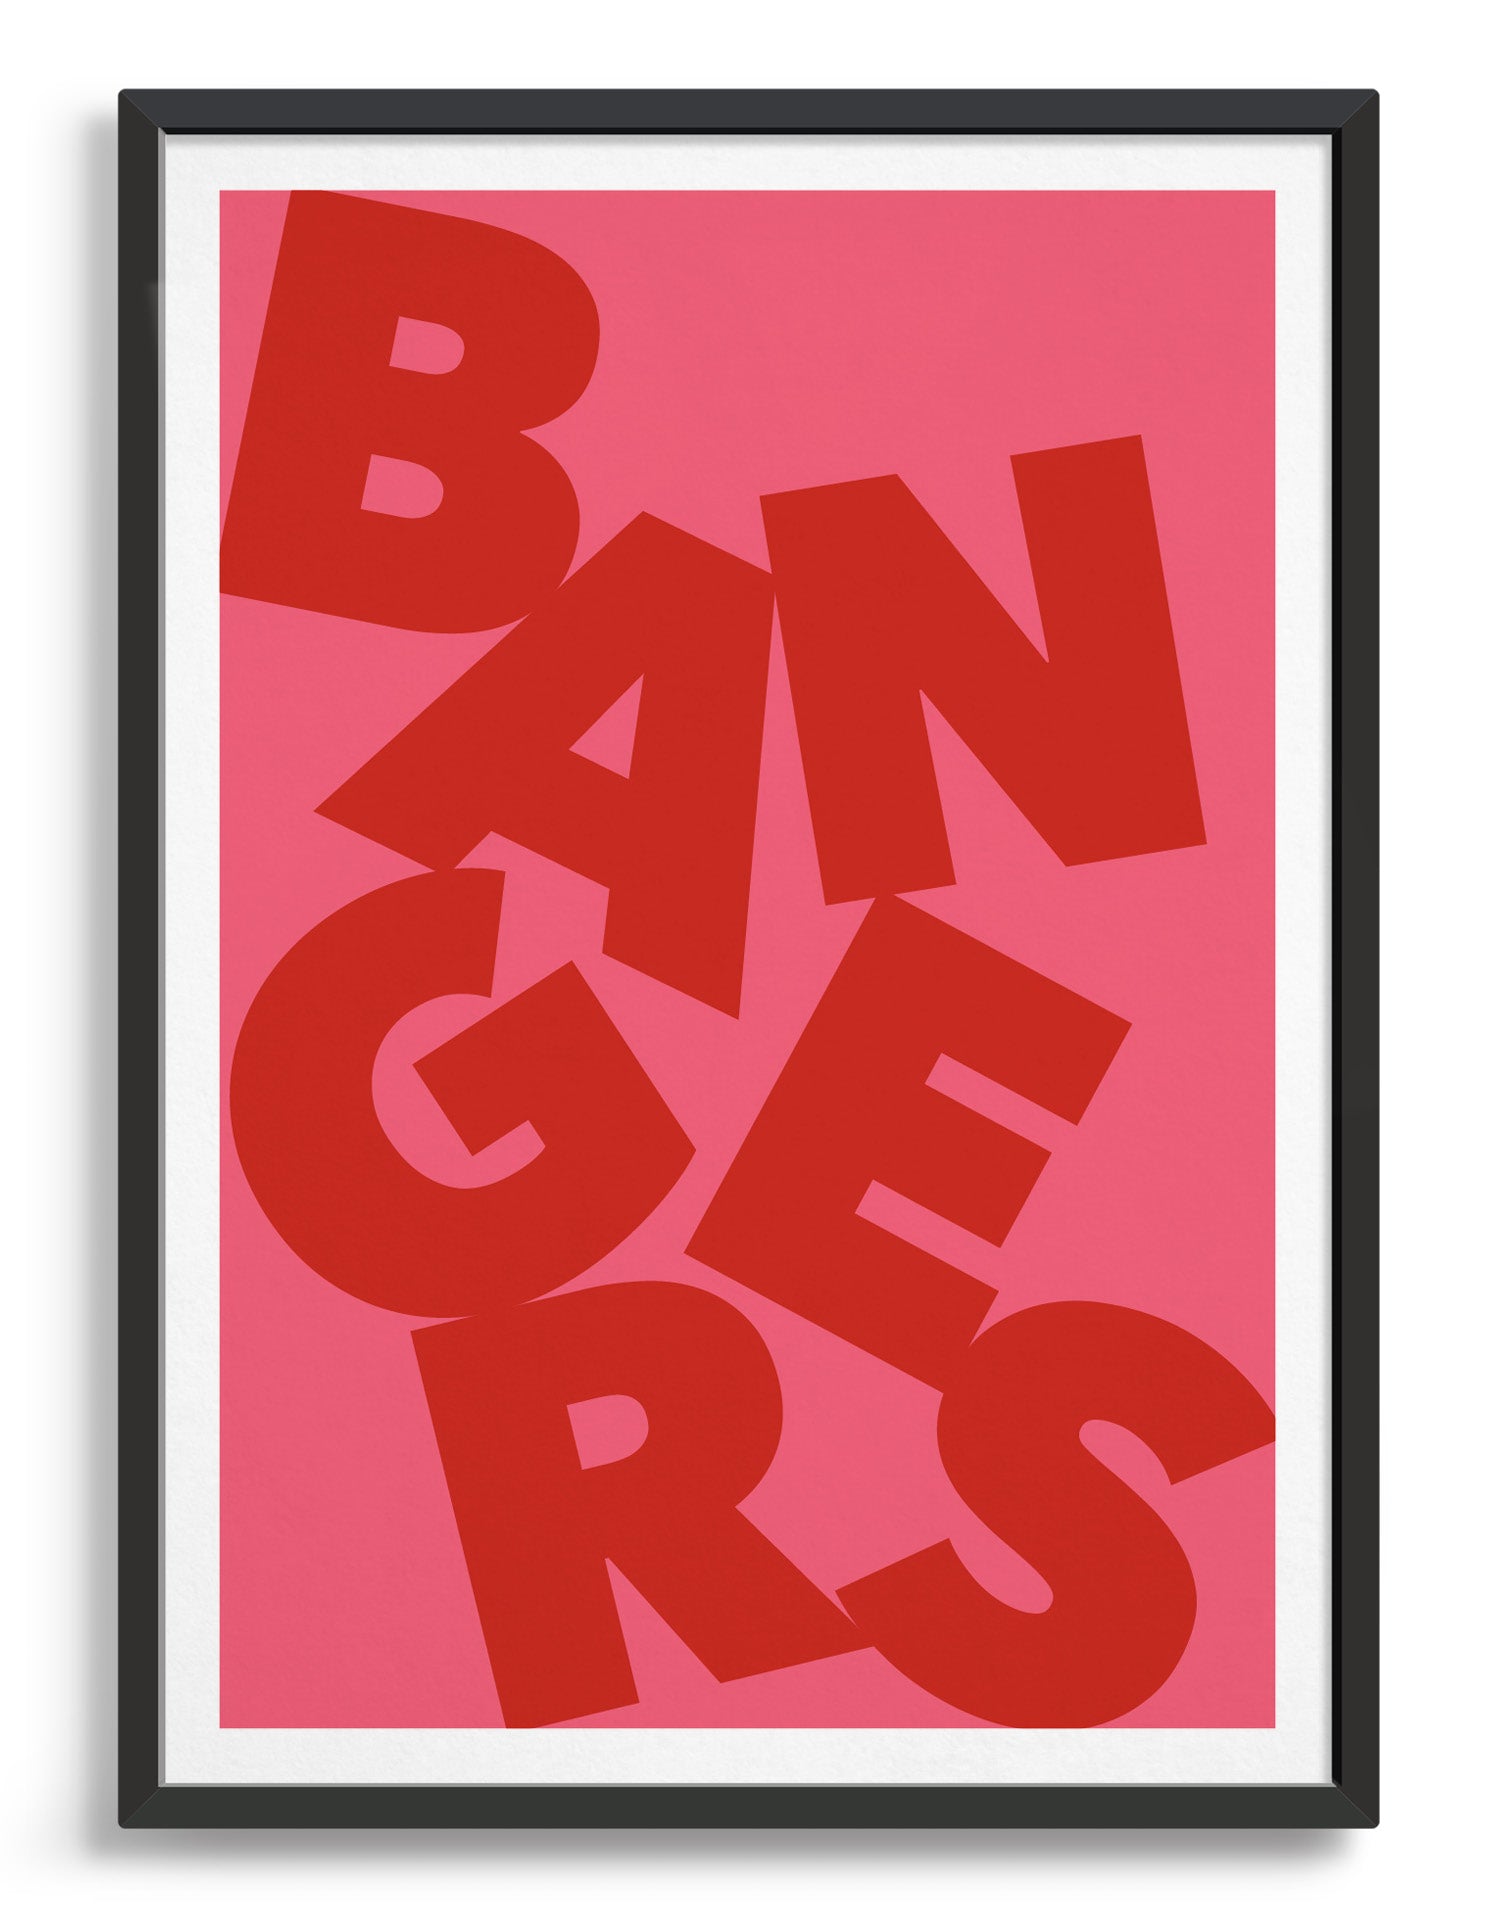 Framed typography art print of the word Bangers in red text against a pink background